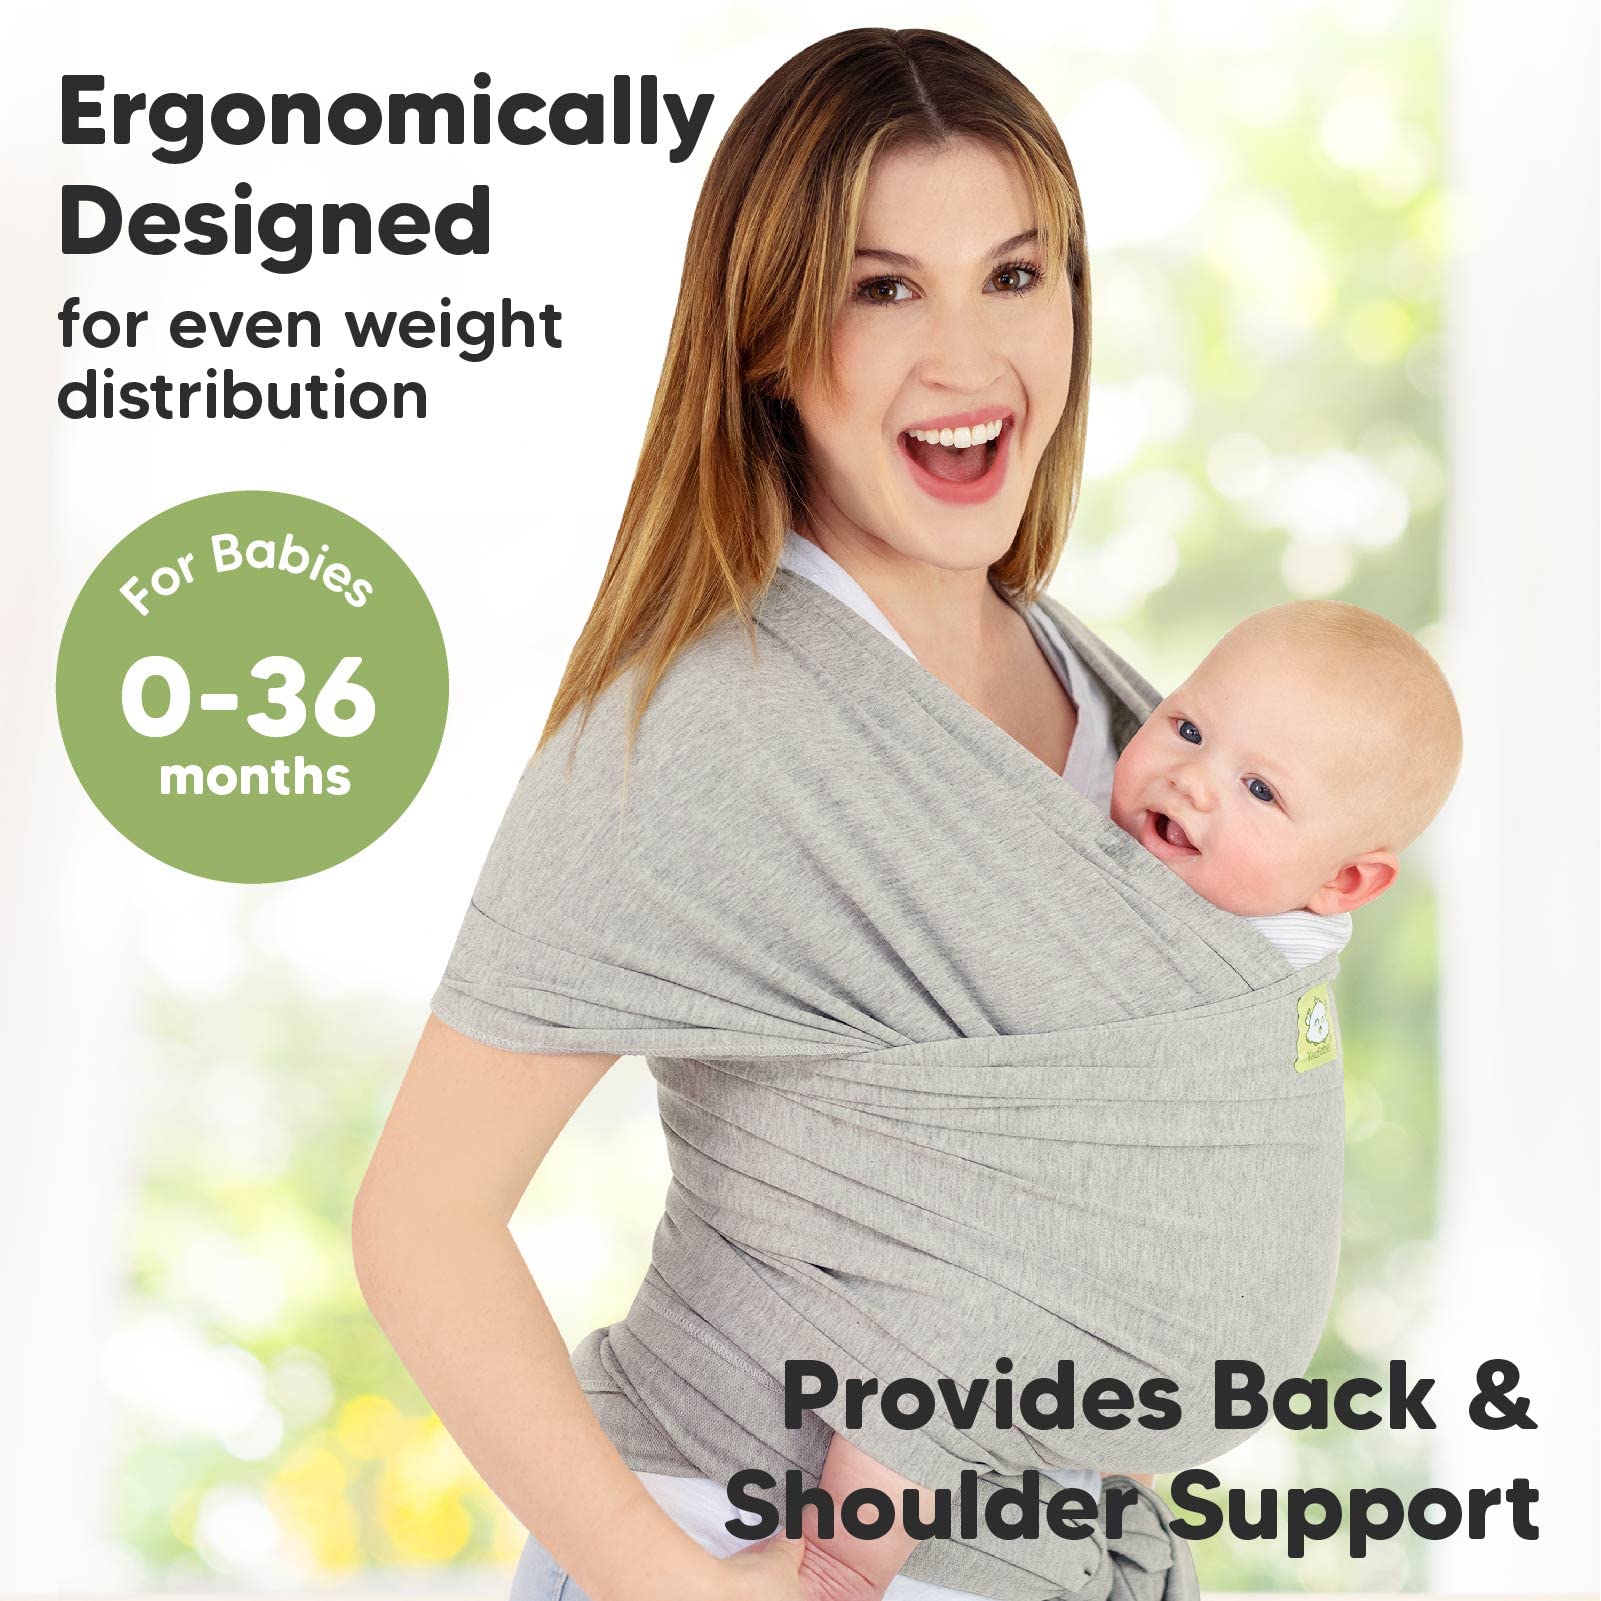 KeaBabies Baby Wrap Carrier and Baby Diaper Caddy Organizer - All in 1 Original Breathable Baby Sling - Large Baby Organizer - Lightweight,Hands Free Baby Carrier Sling - Large Baby Organizer